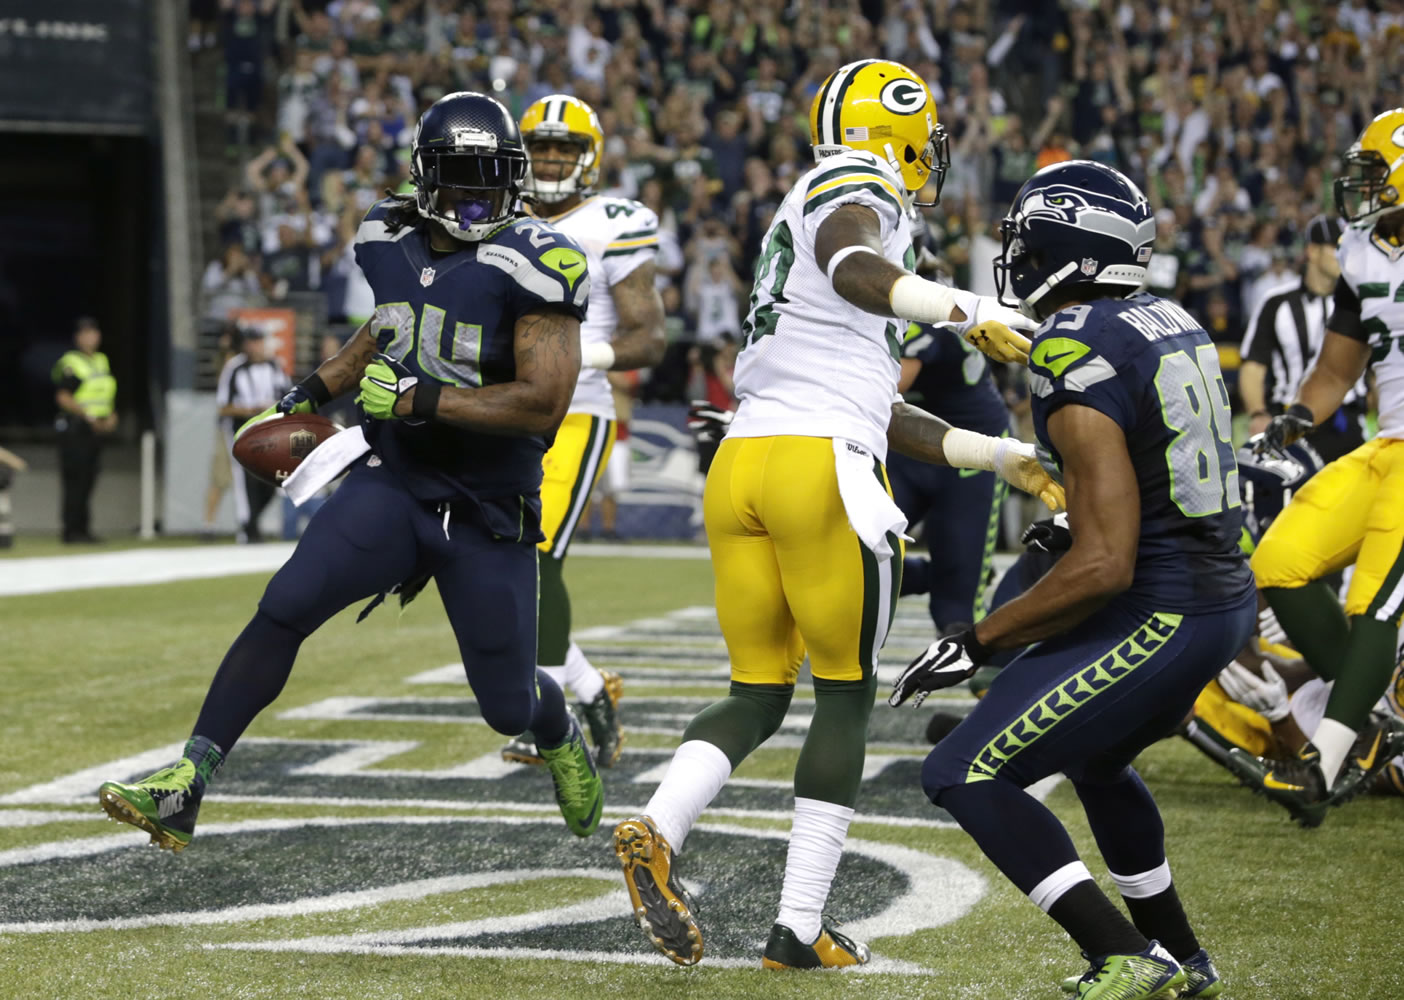 Seattle Seahawks running back Marshawn Lynch, left, looks back after a touchdown against the Green Bay Packers in the second half of an NFL football game, Thursday, Sept. 4, 2014, in Seattle.